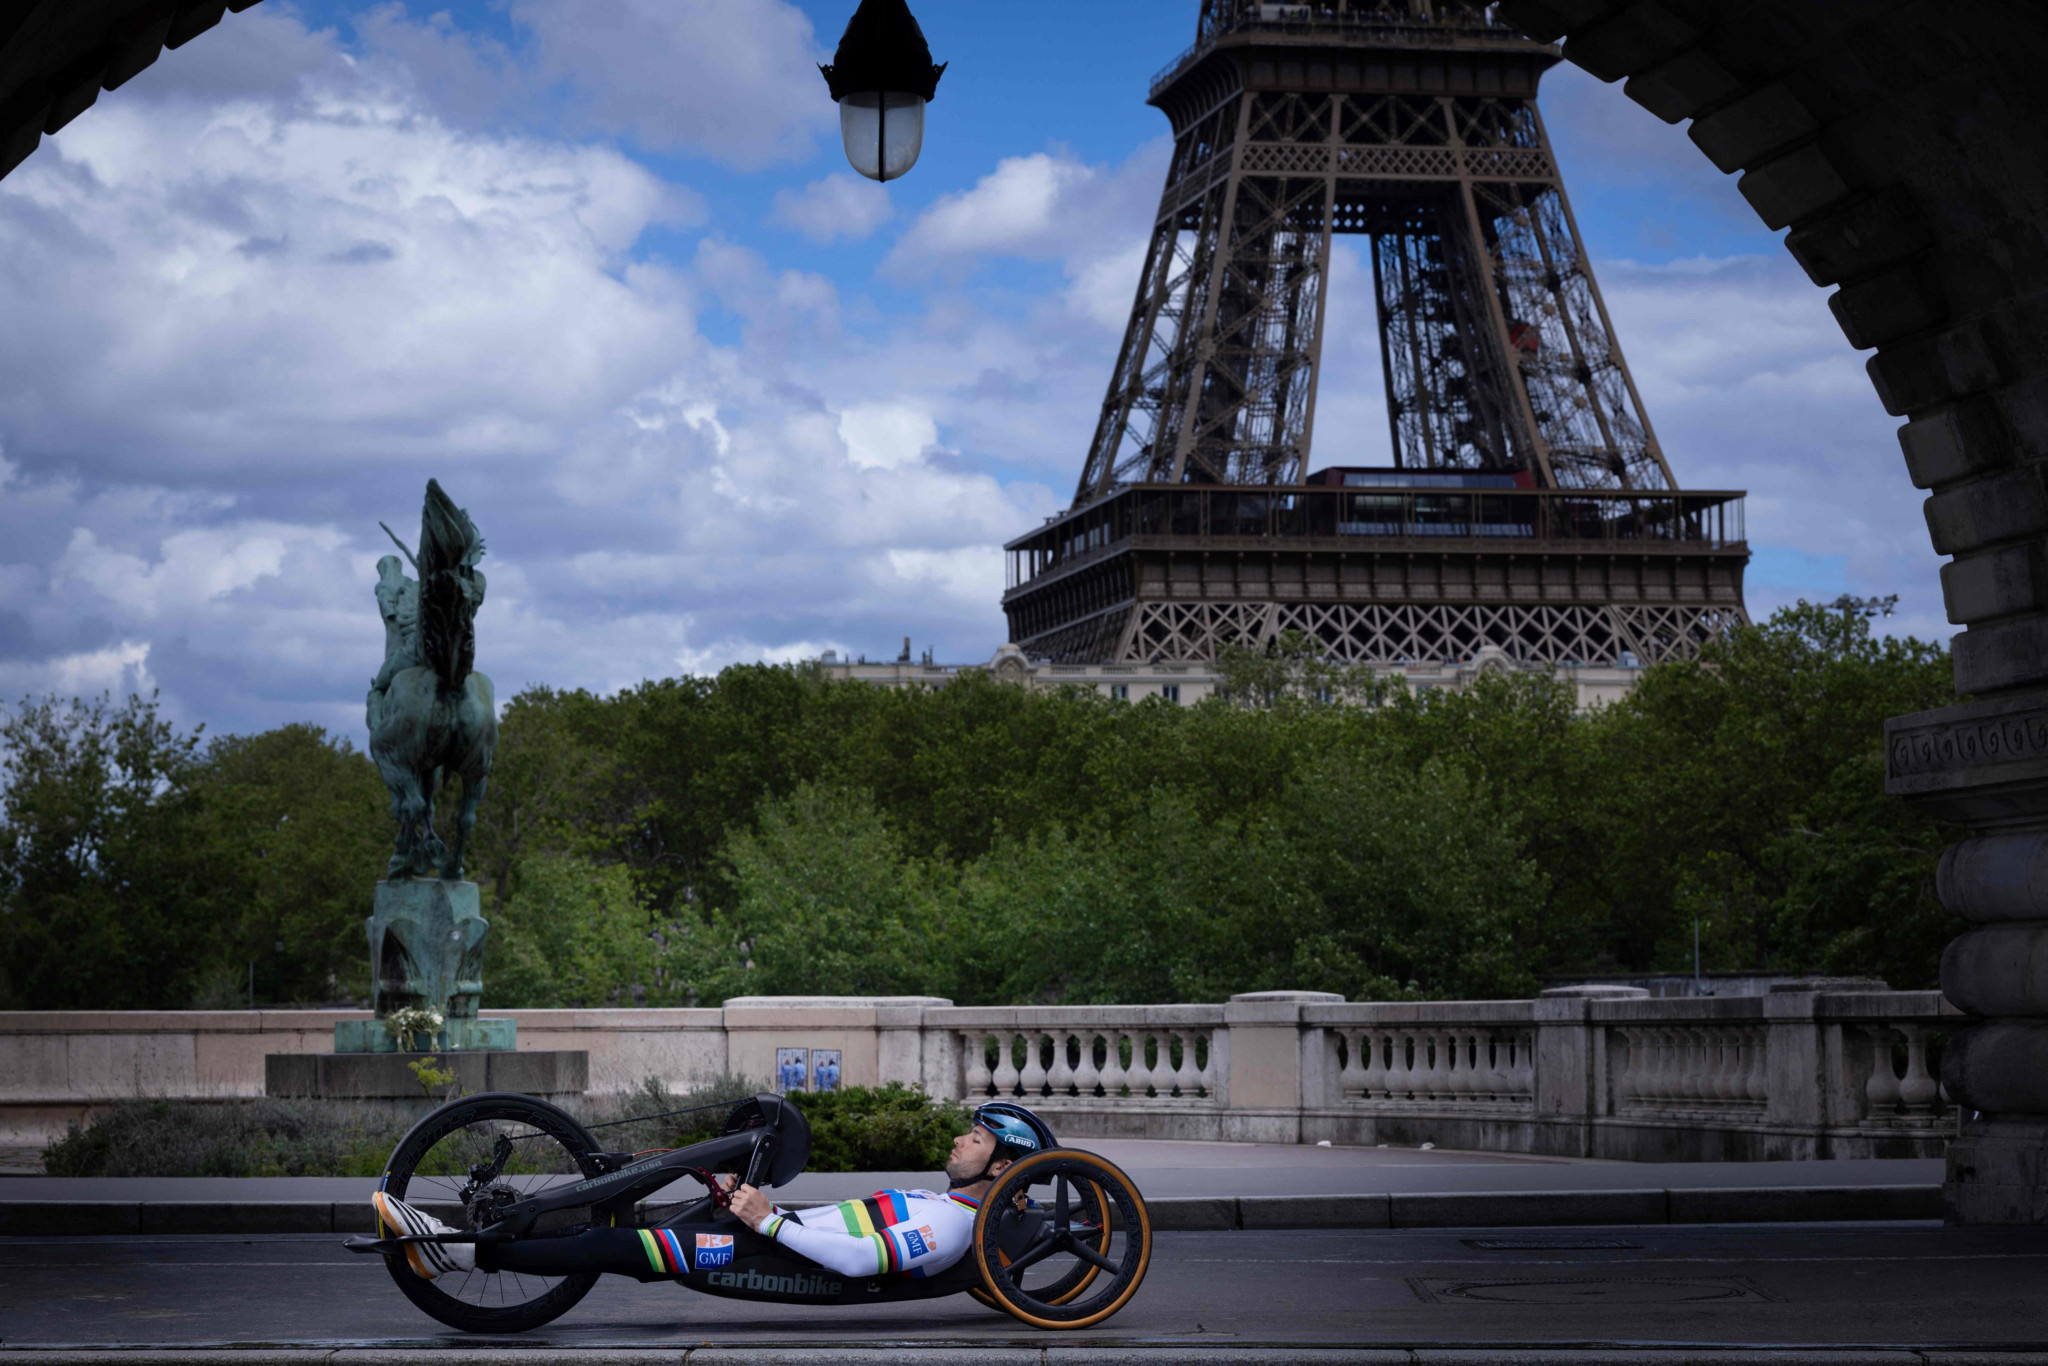 TOPSHOT - France's paralympian cyclist Florian Jouanny poses at The Bir-Hakeim Bridge in Paris on May 6, 2024, ahead of Paris 2024 Olympic and Paralympic games. The Bir-Hakeim bridge is a two-level bridge built in the early 20th century, registered as a historical monument by decree of July 10, 1986. (Photo by Joël SAGET / AFP) / RESTRICTED TO EDITORIAL USE